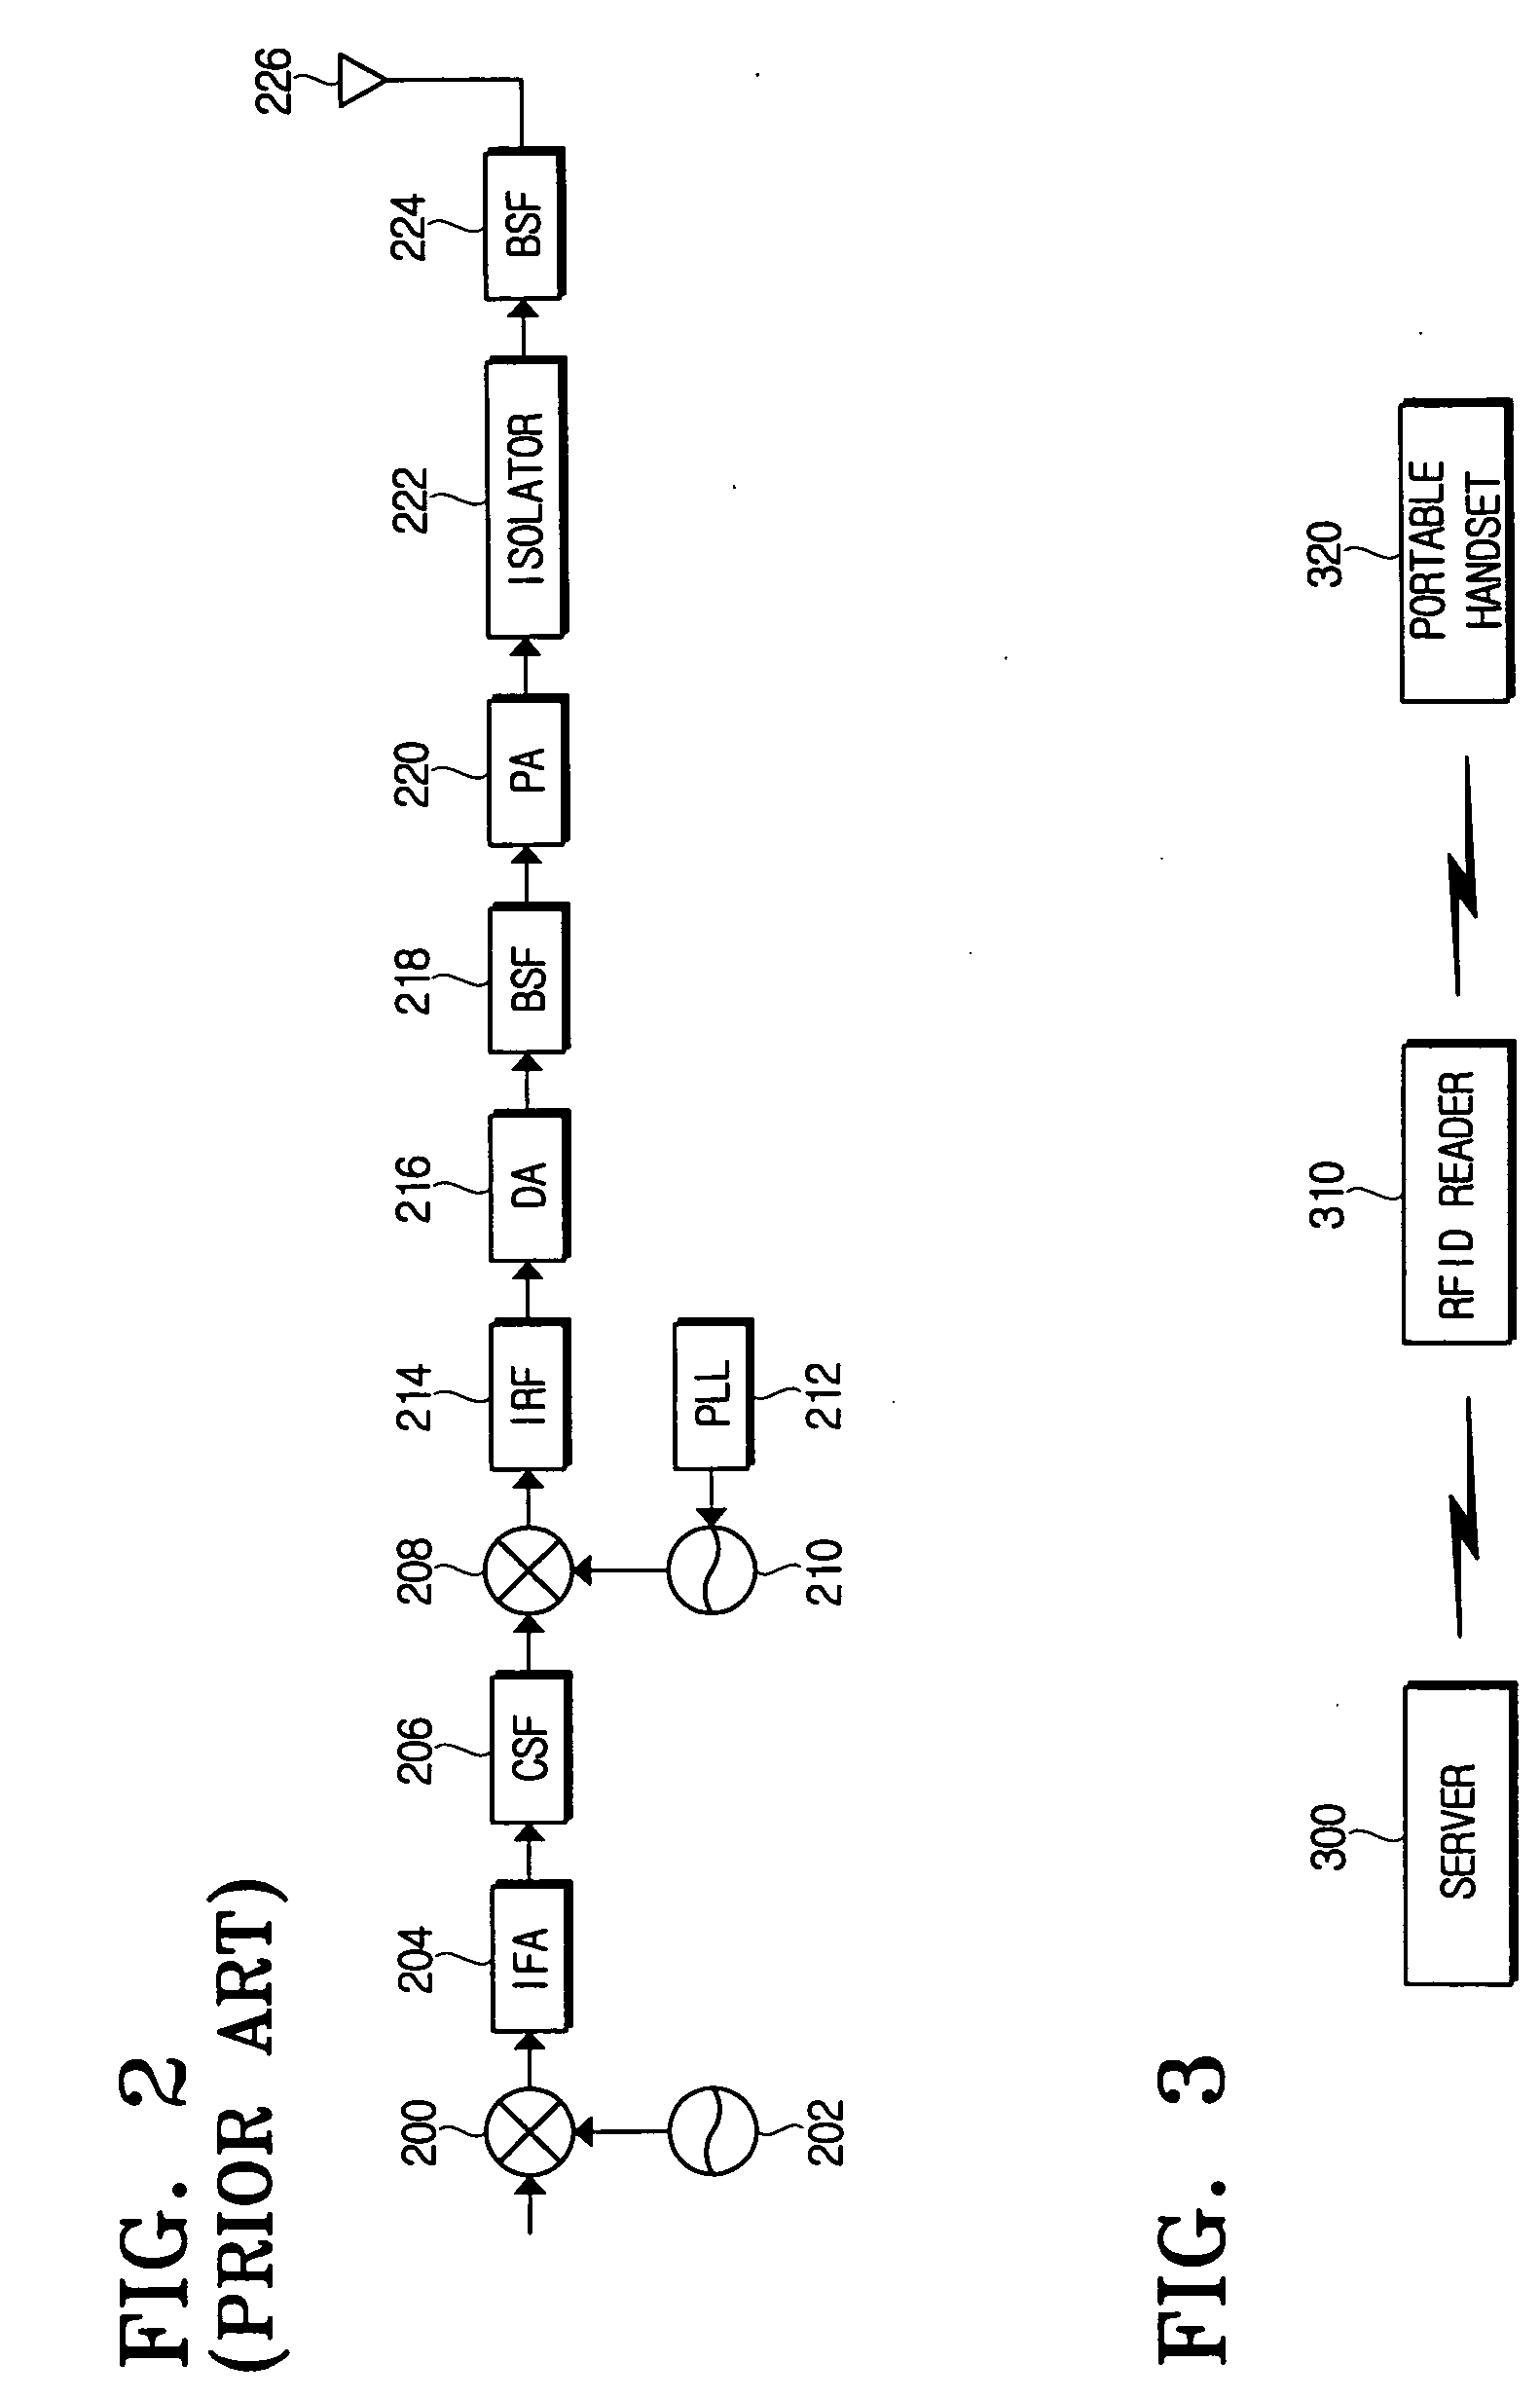 Portable handset having a radio frequency indentification(RFID) function and method using the same